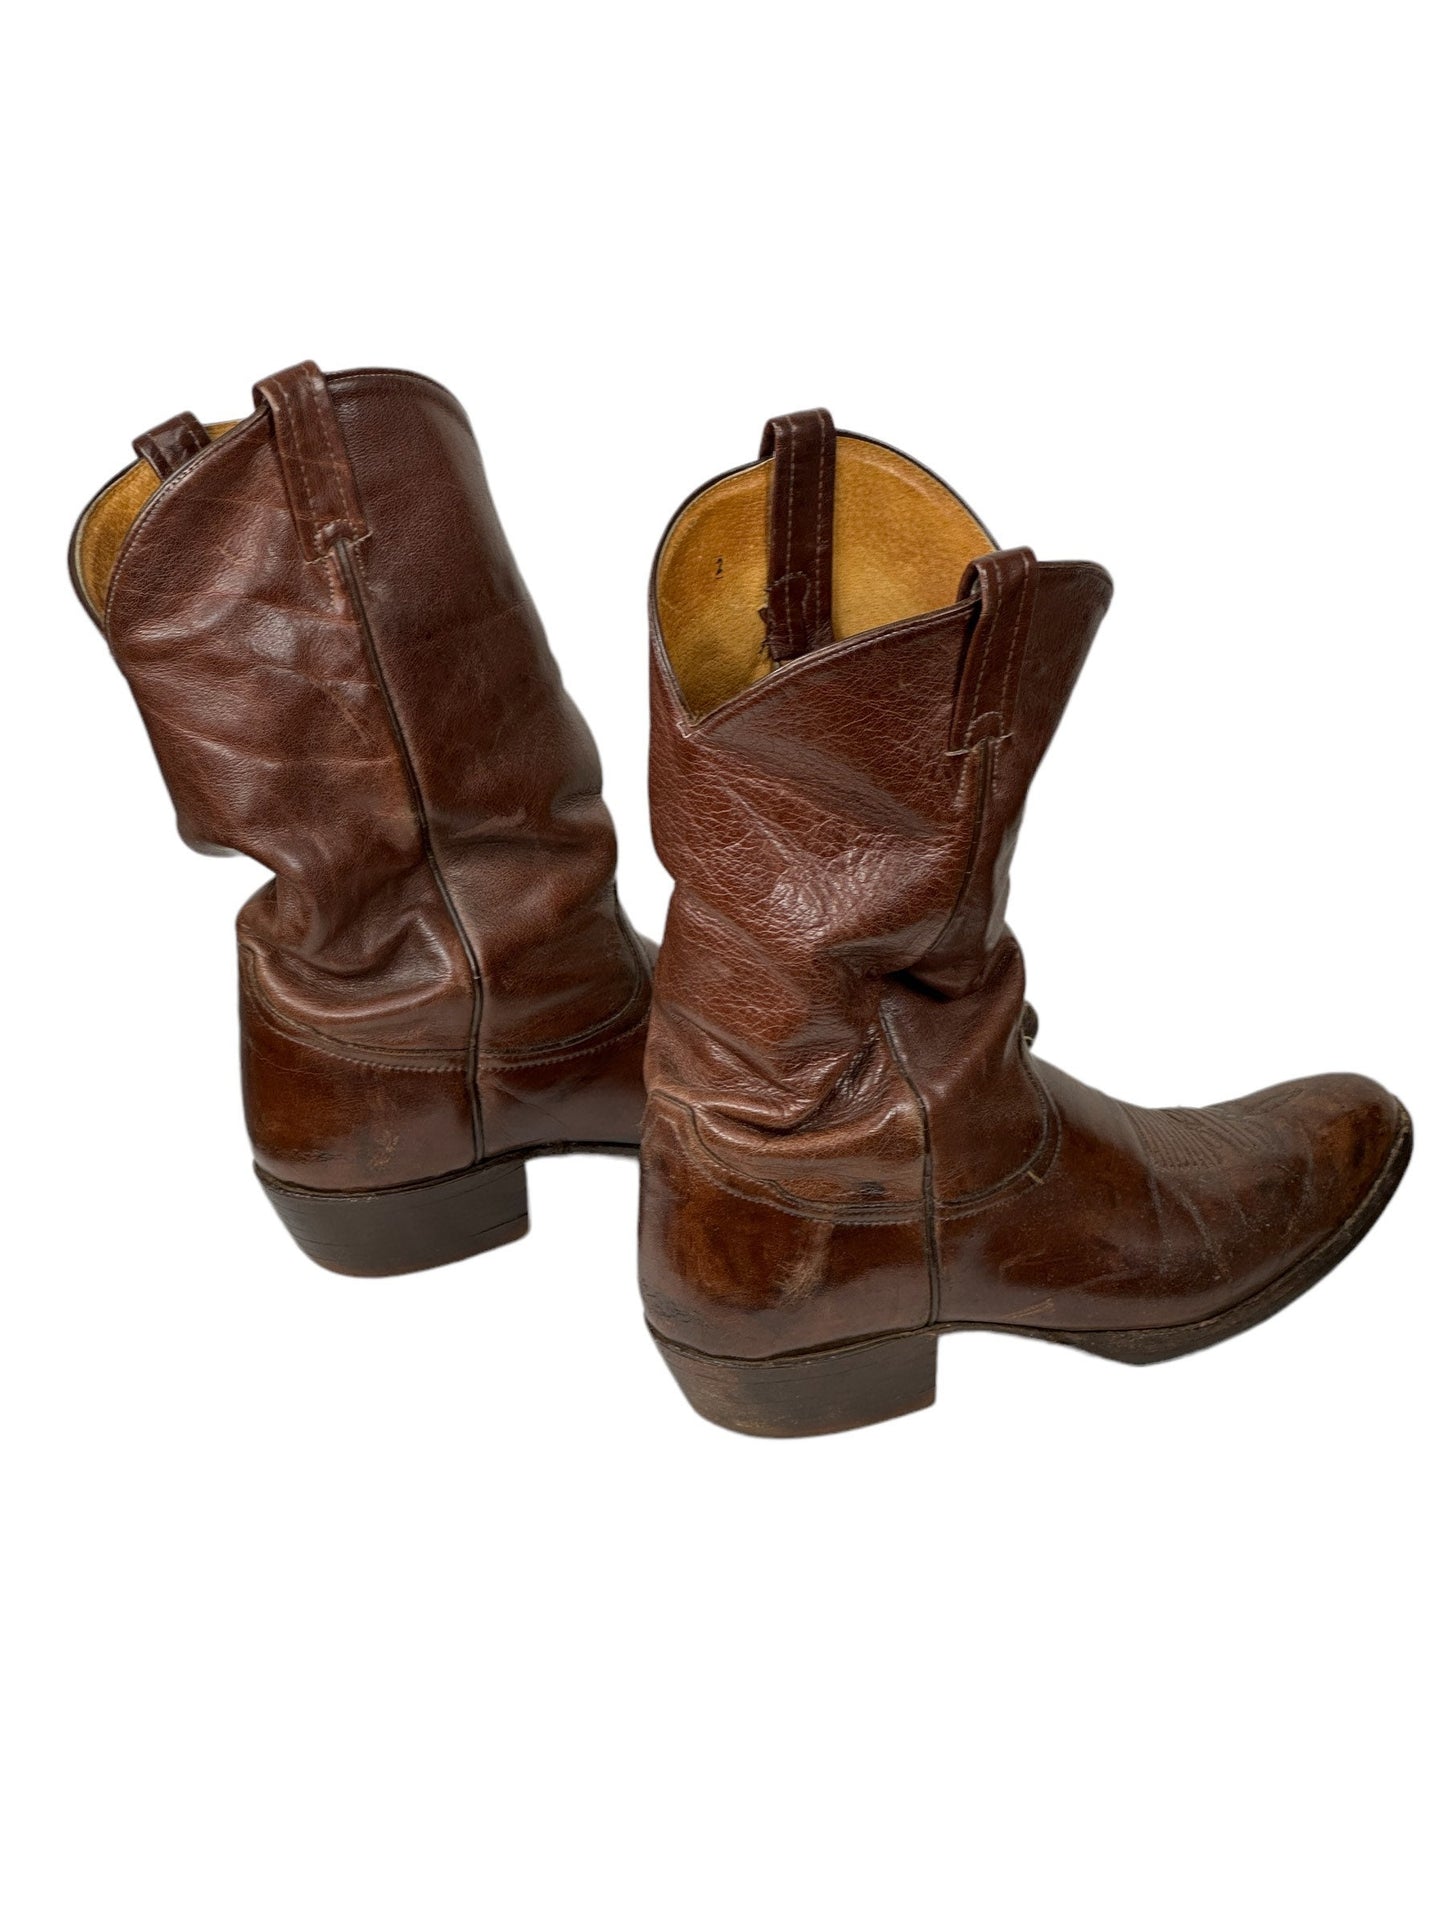 Vintage Tony Lama brown boots style 61534 Size 12.5